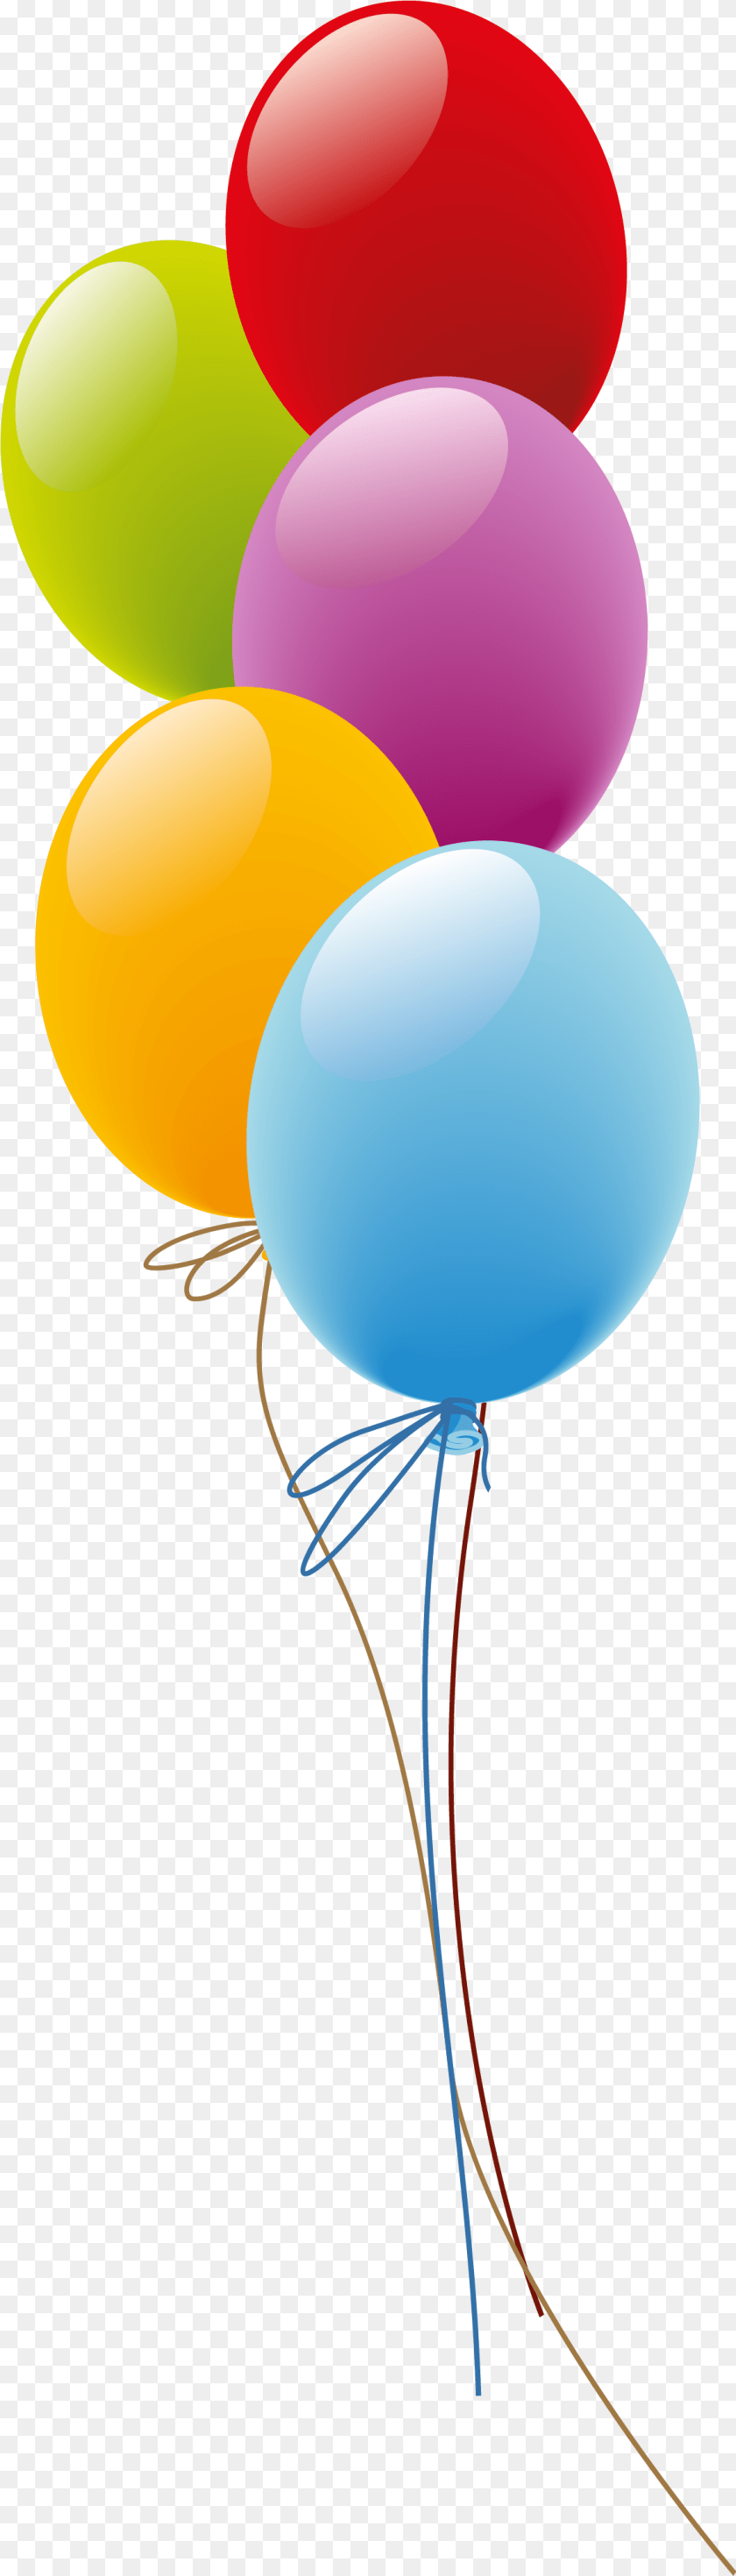 1163x4070 Blue Balloon Birthday Party Balloons PNG